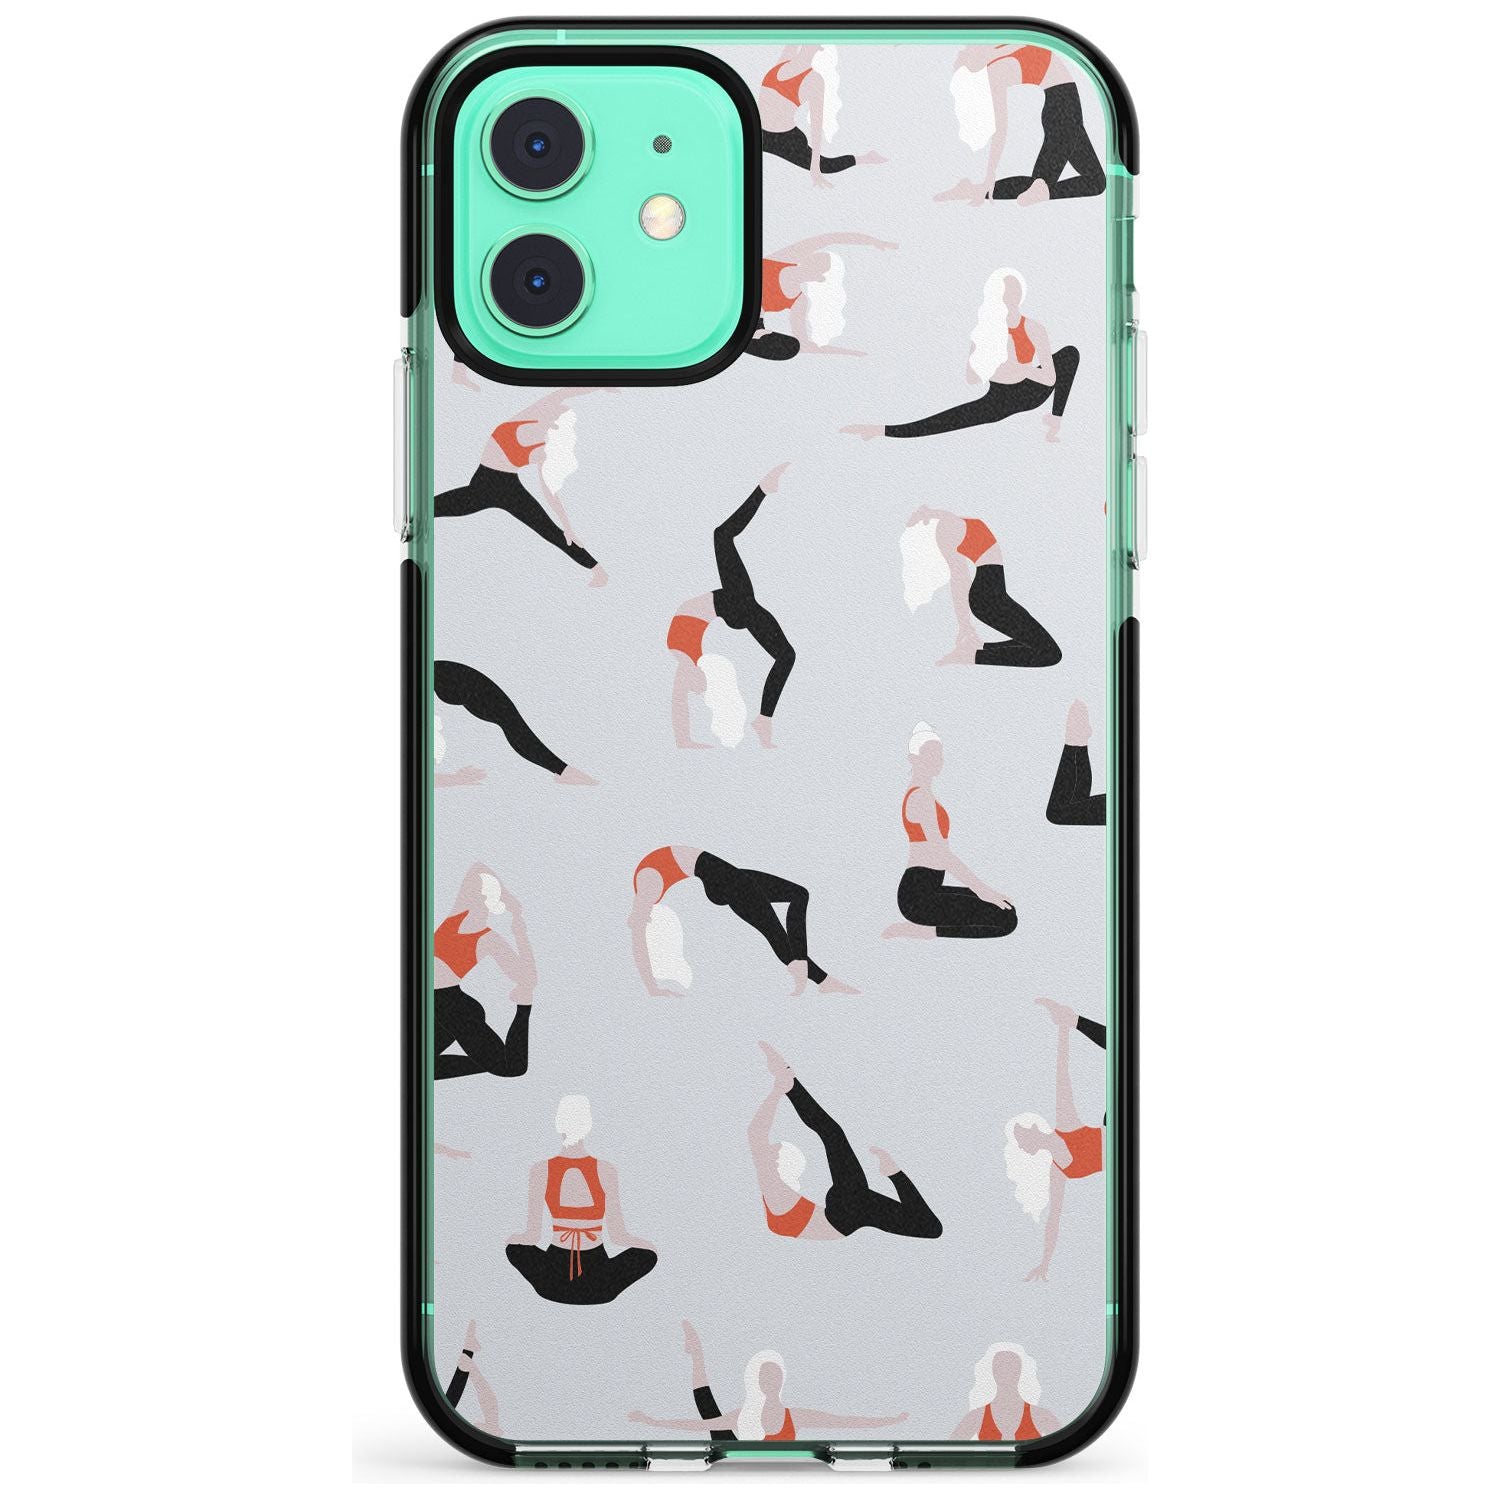 Yoga Poses Pink Fade Impact Phone Case for iPhone 11 Pro Max